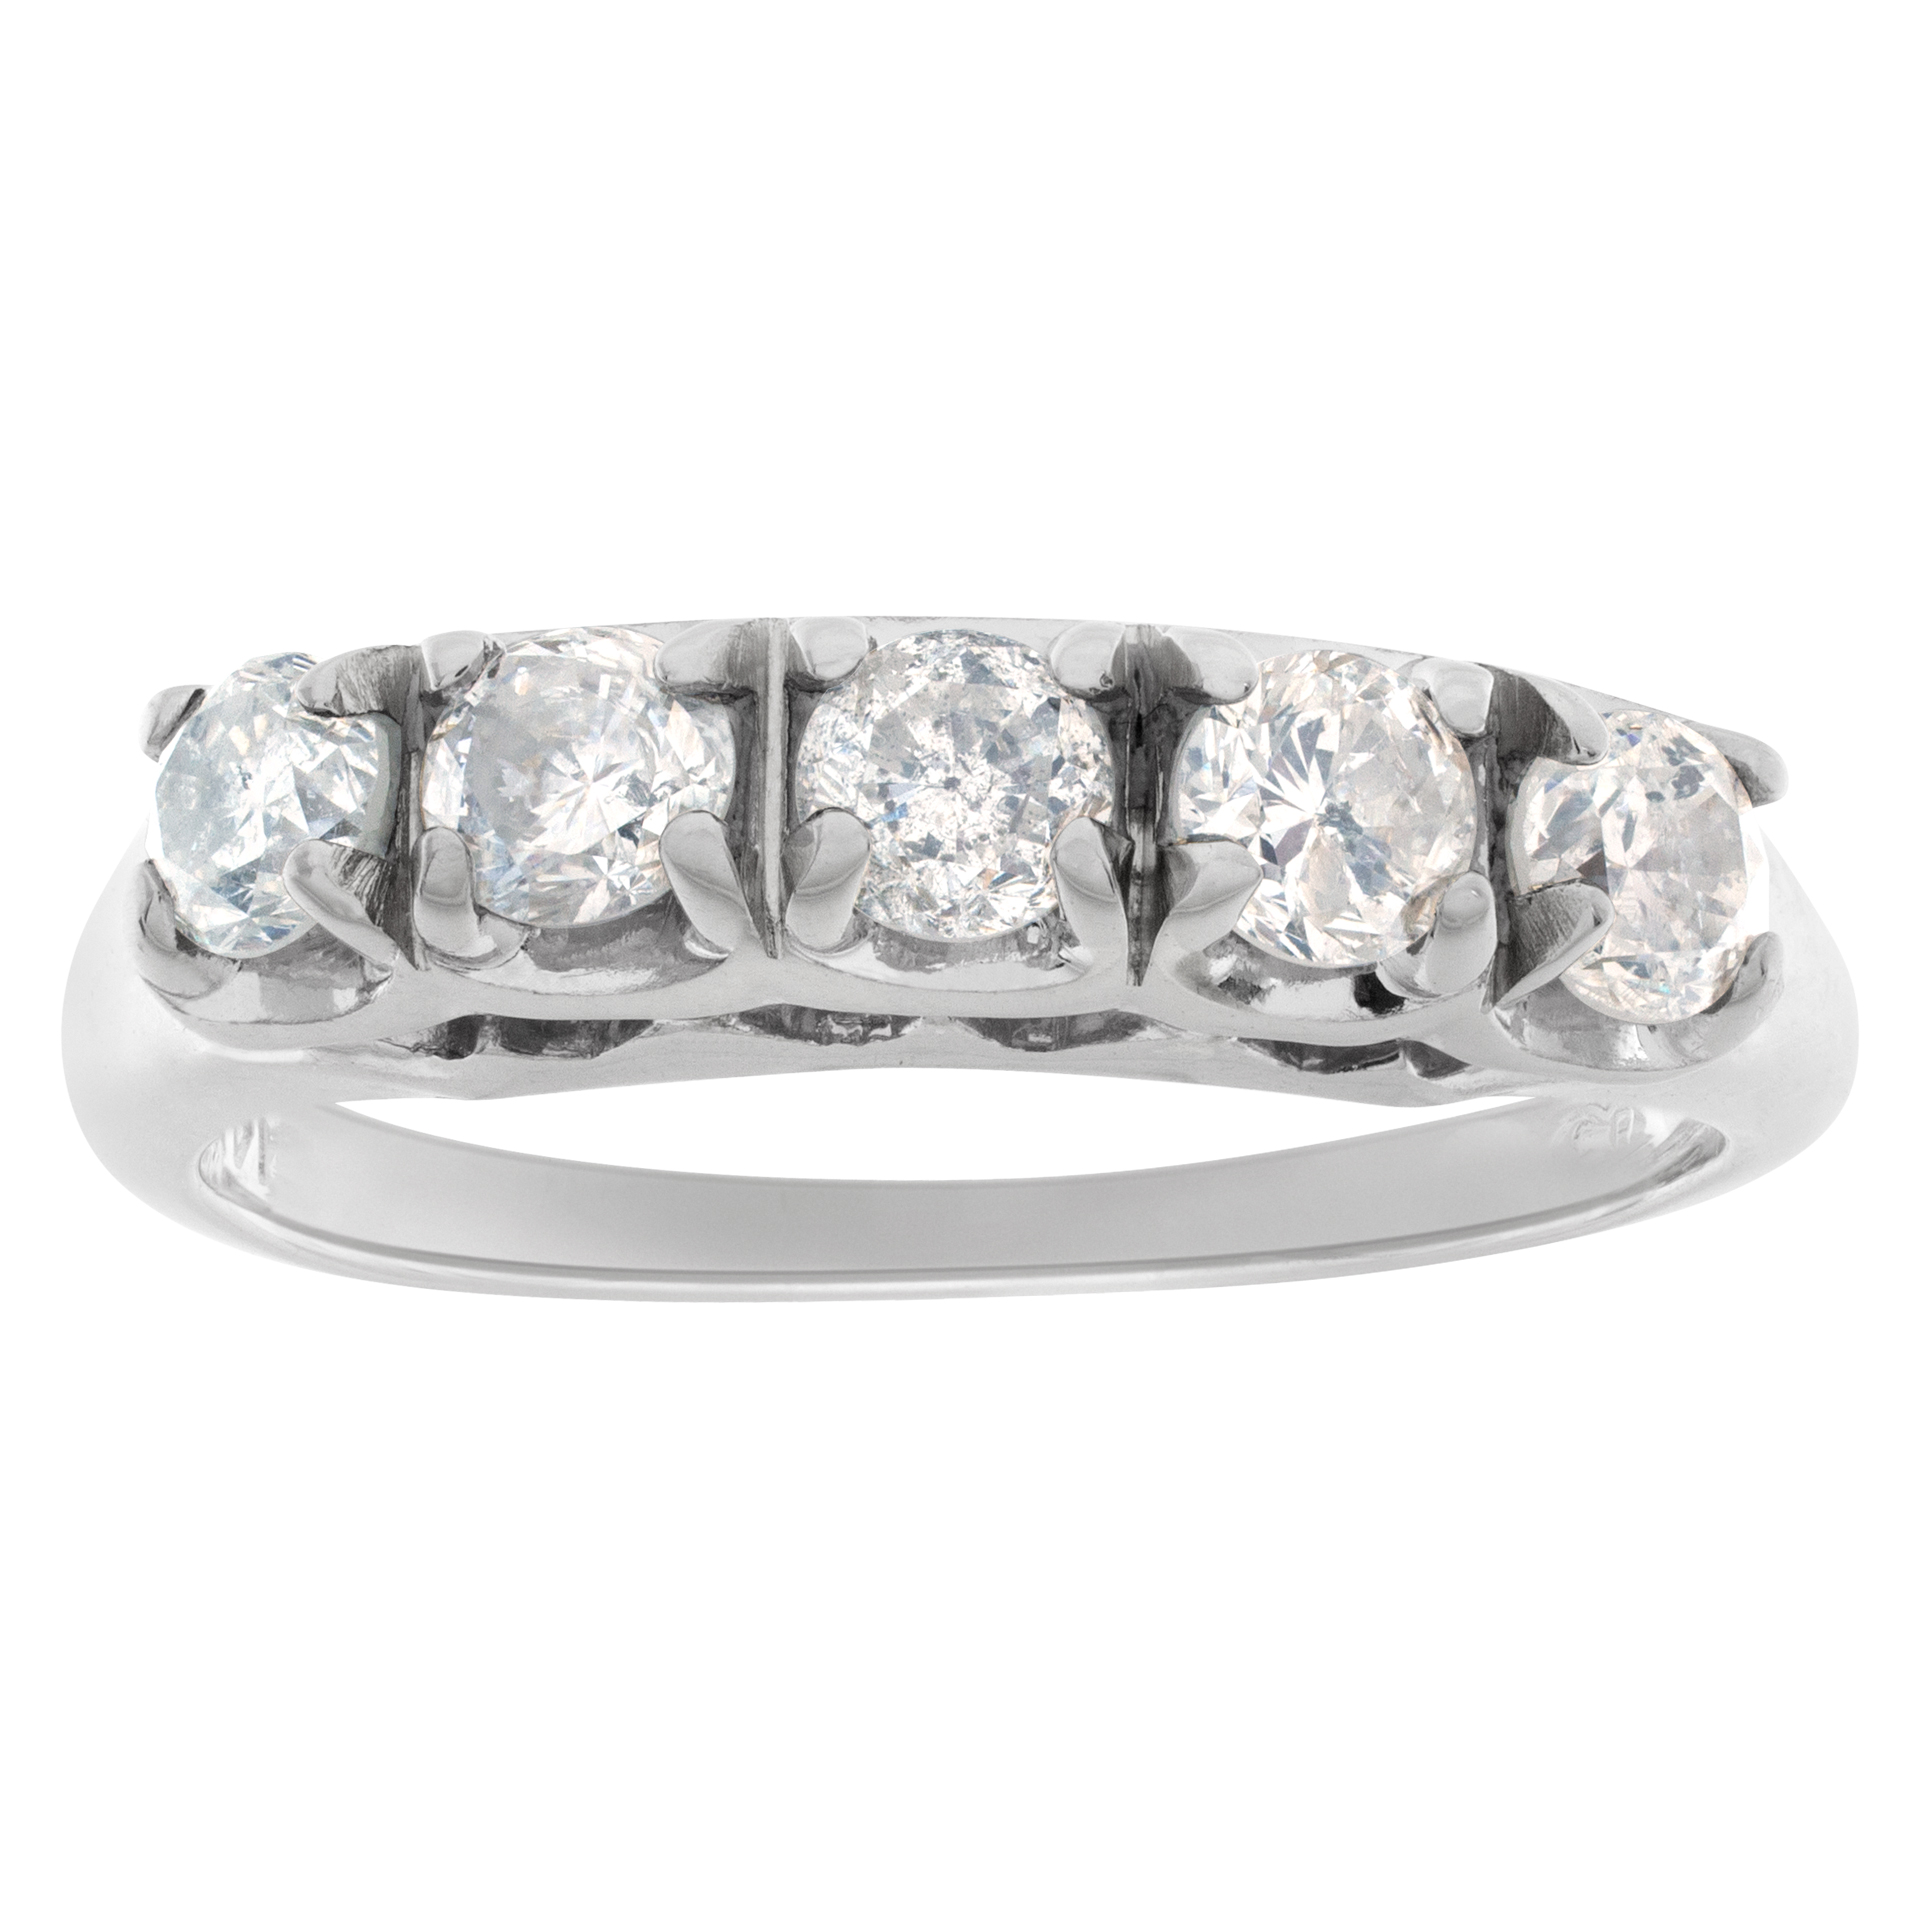 Diamond band in 14k white gold. 1.00 carats in diamond. Size 6.75